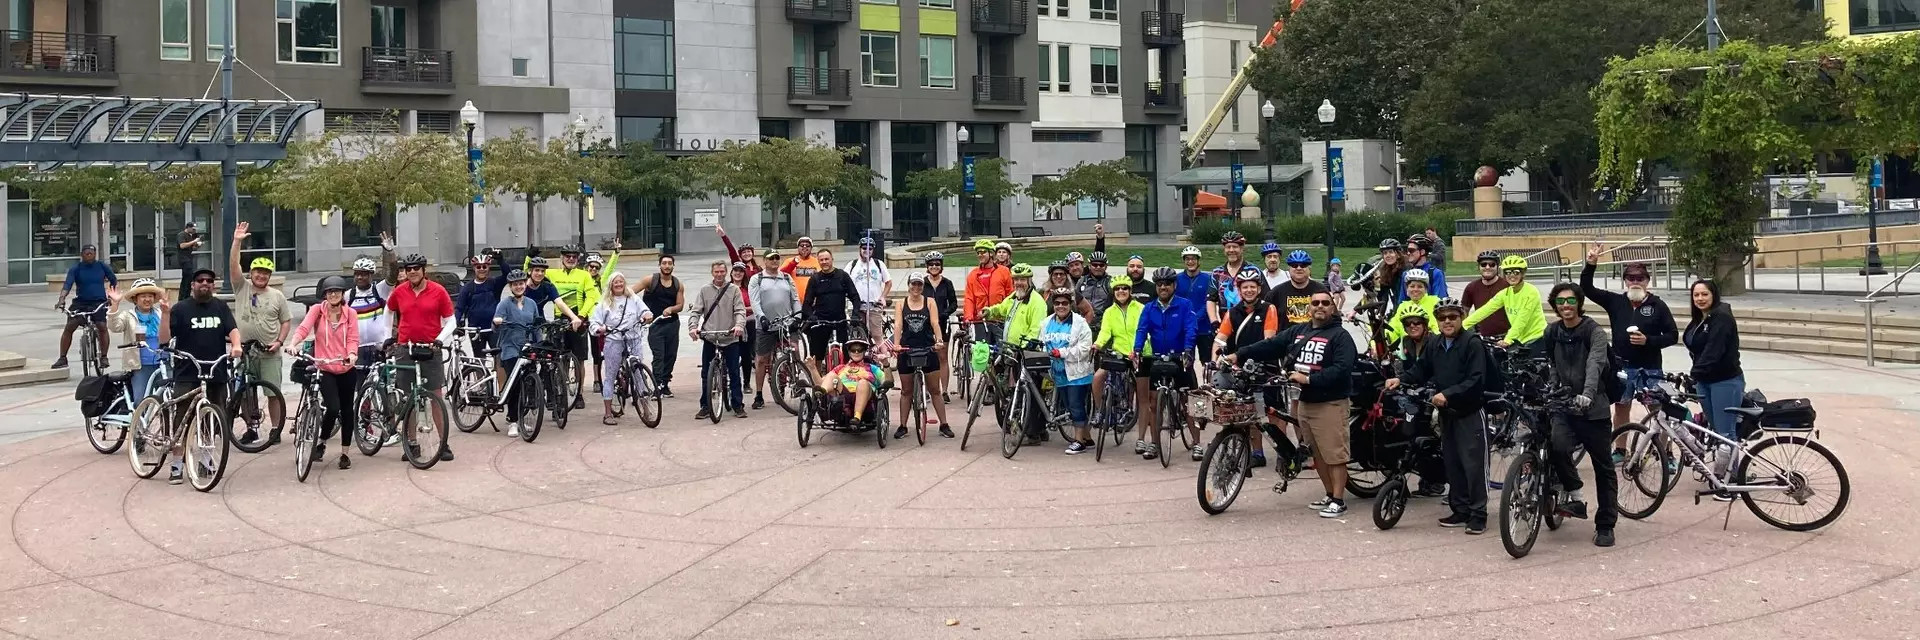 large group of people with bikes